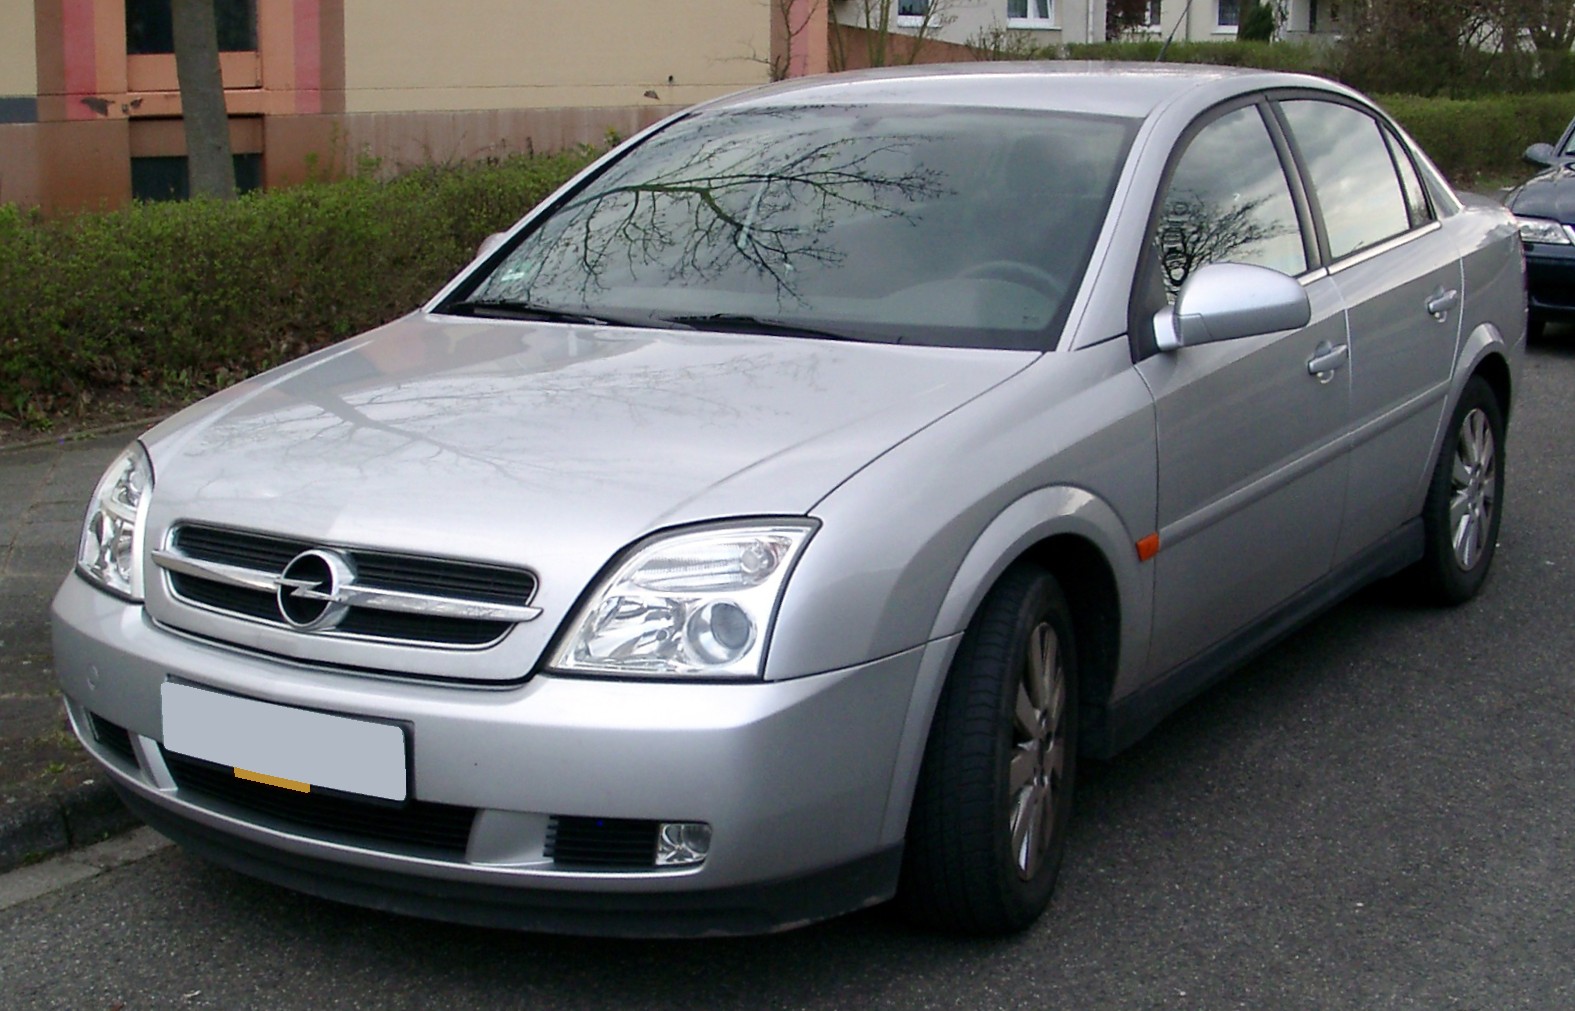 File:Opel Vectra C front 20080331.jpg - Wikimedia Commons